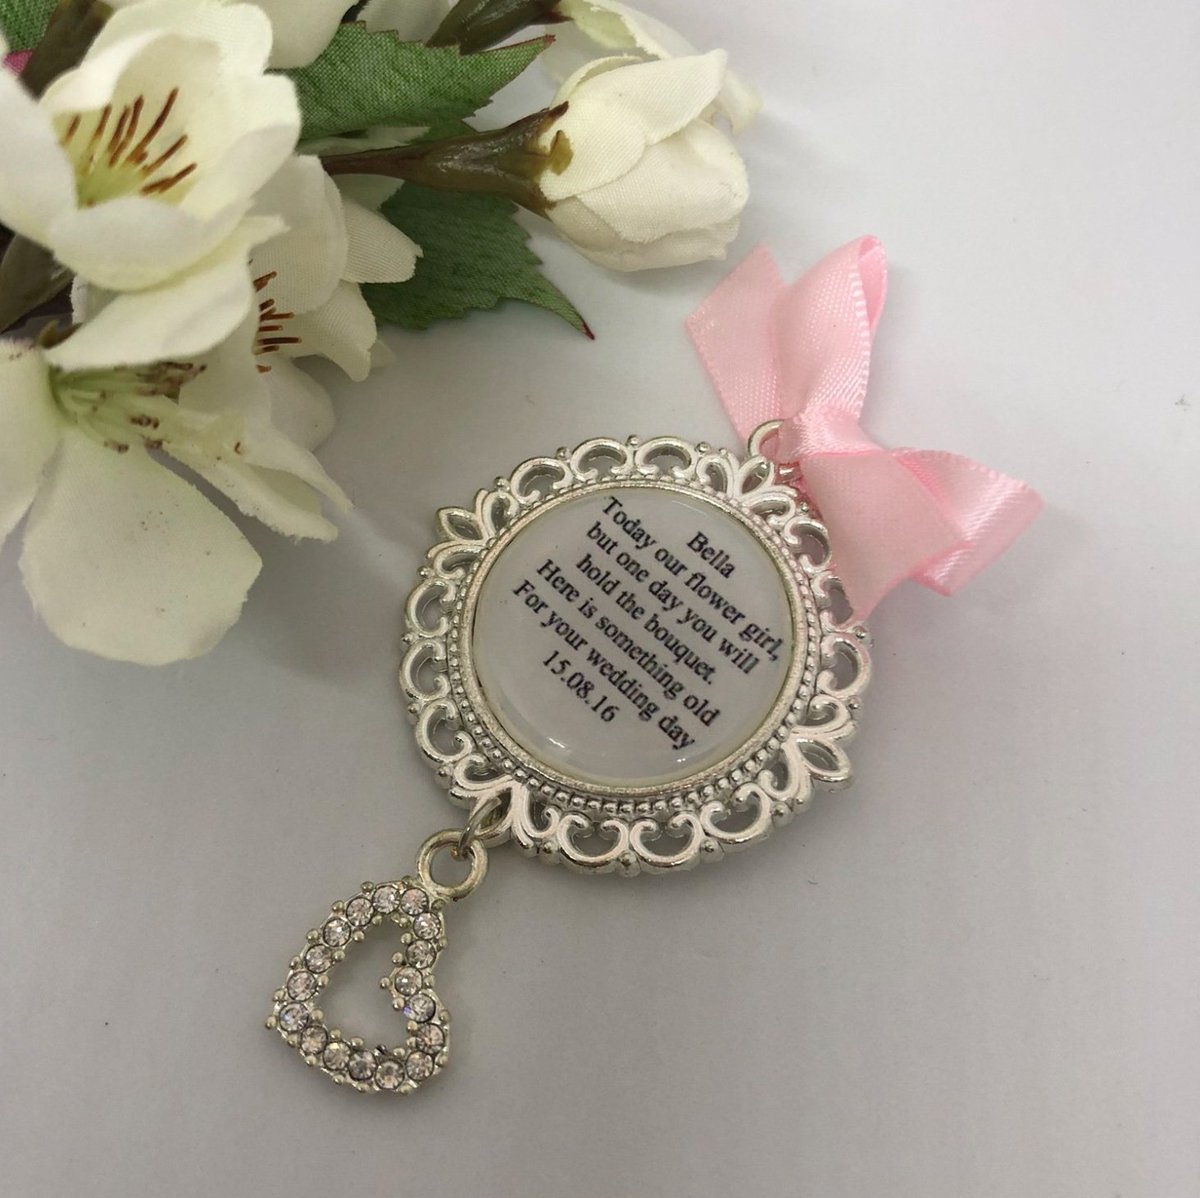 MISSY is a pretty Flowergirl gift/ keepsake for the little princesses in your bridal party @bejewelled_bridal #flowergirl #flowergirls #bridalgift #bridalgifts #bridalmomento #weddingmomento #weddingkeepsake #weddinginspiration #bridalinspiration